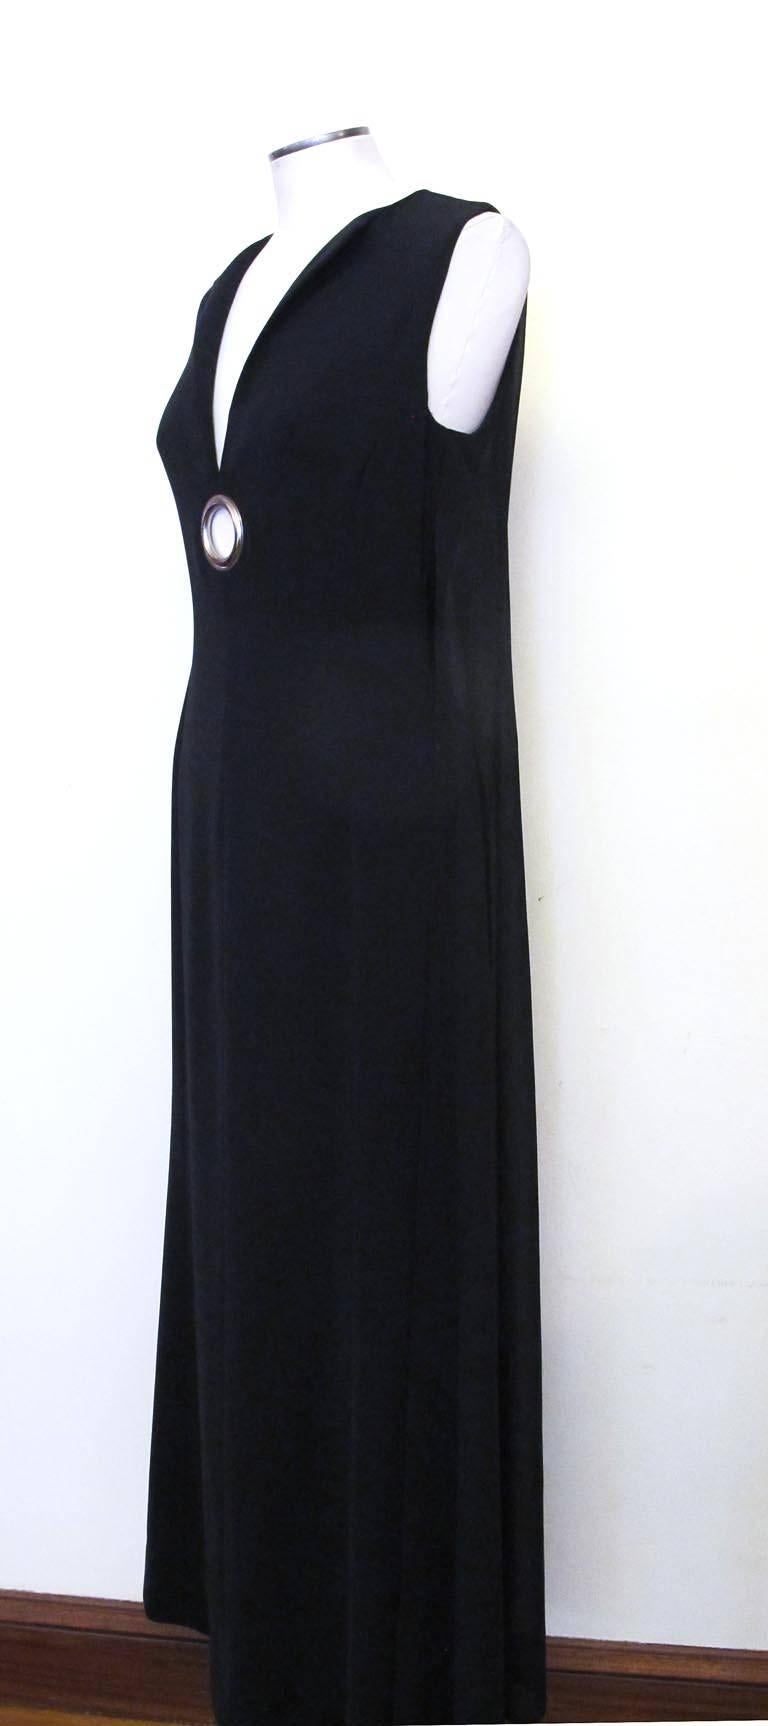 This vintage Paco Rabanne sleeveless black evening gown has two fabulous sheer panels attached to the back and drop to the floor, plus an open silver-tone metal ring at the bottom of the V-shaped neck line. The panels flow freely as one walks and